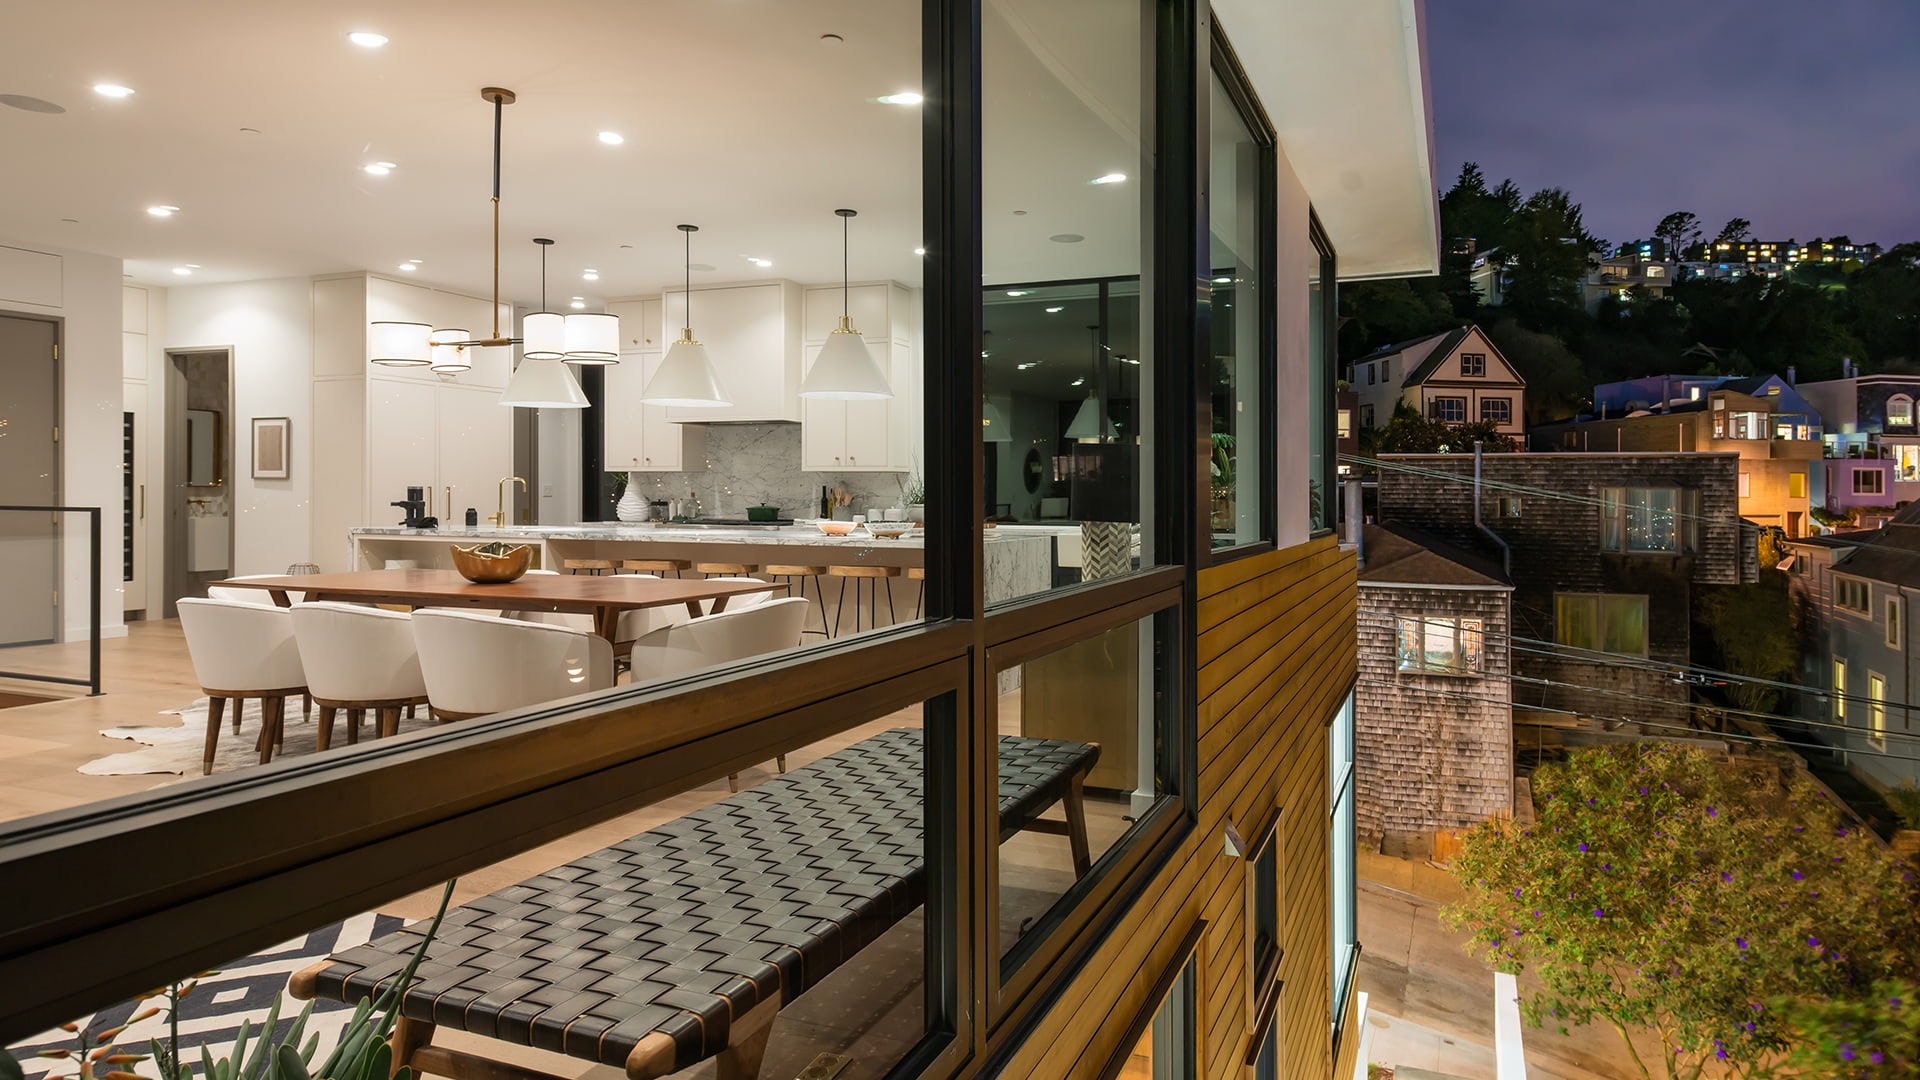 viewed from the exterior, an open concept home is well lit from the inside